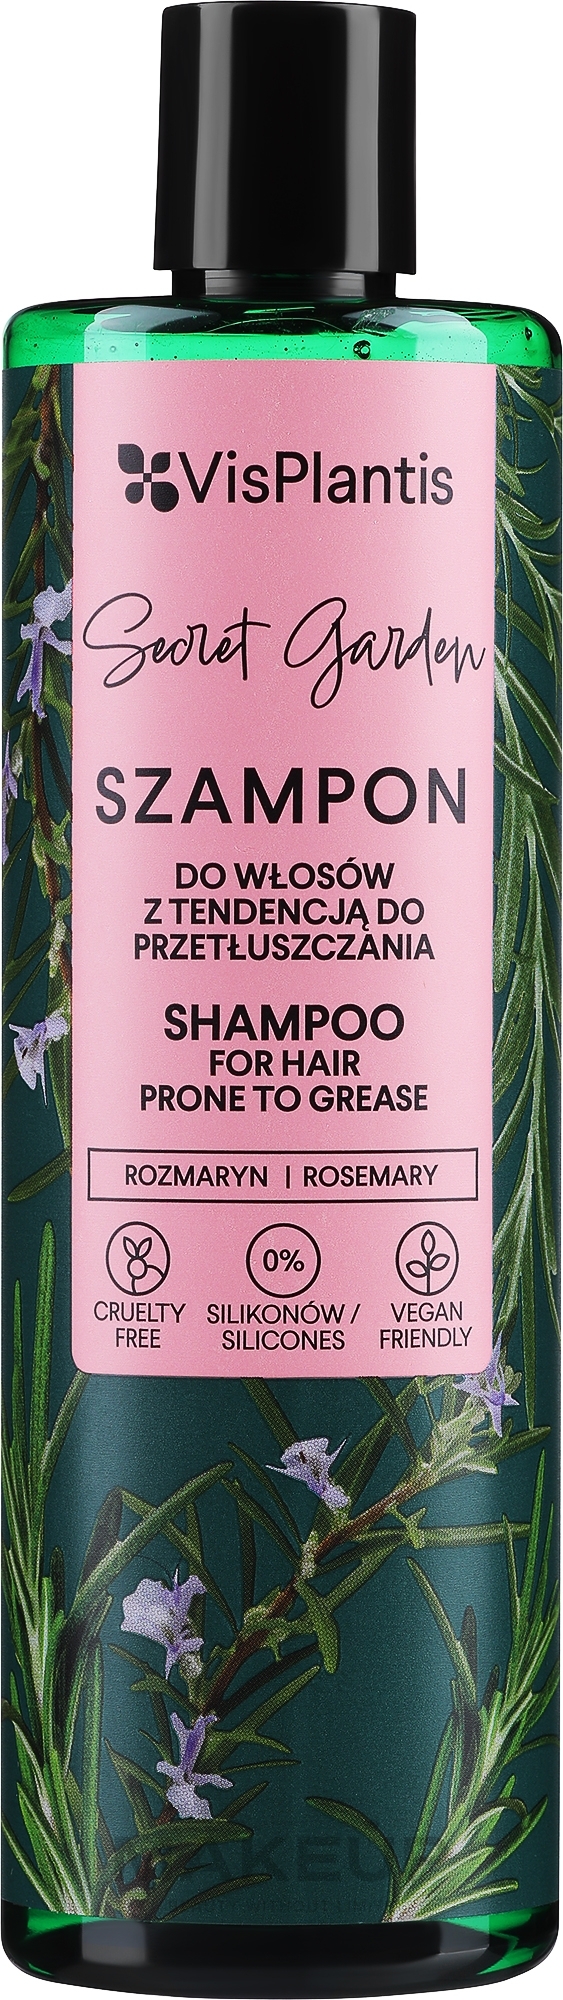 Shampoo für schnell fettendes Haar - Vis Plantis Herbal Vital Care Shampoo For Hair With Tendency To Grease — Foto 400 ml